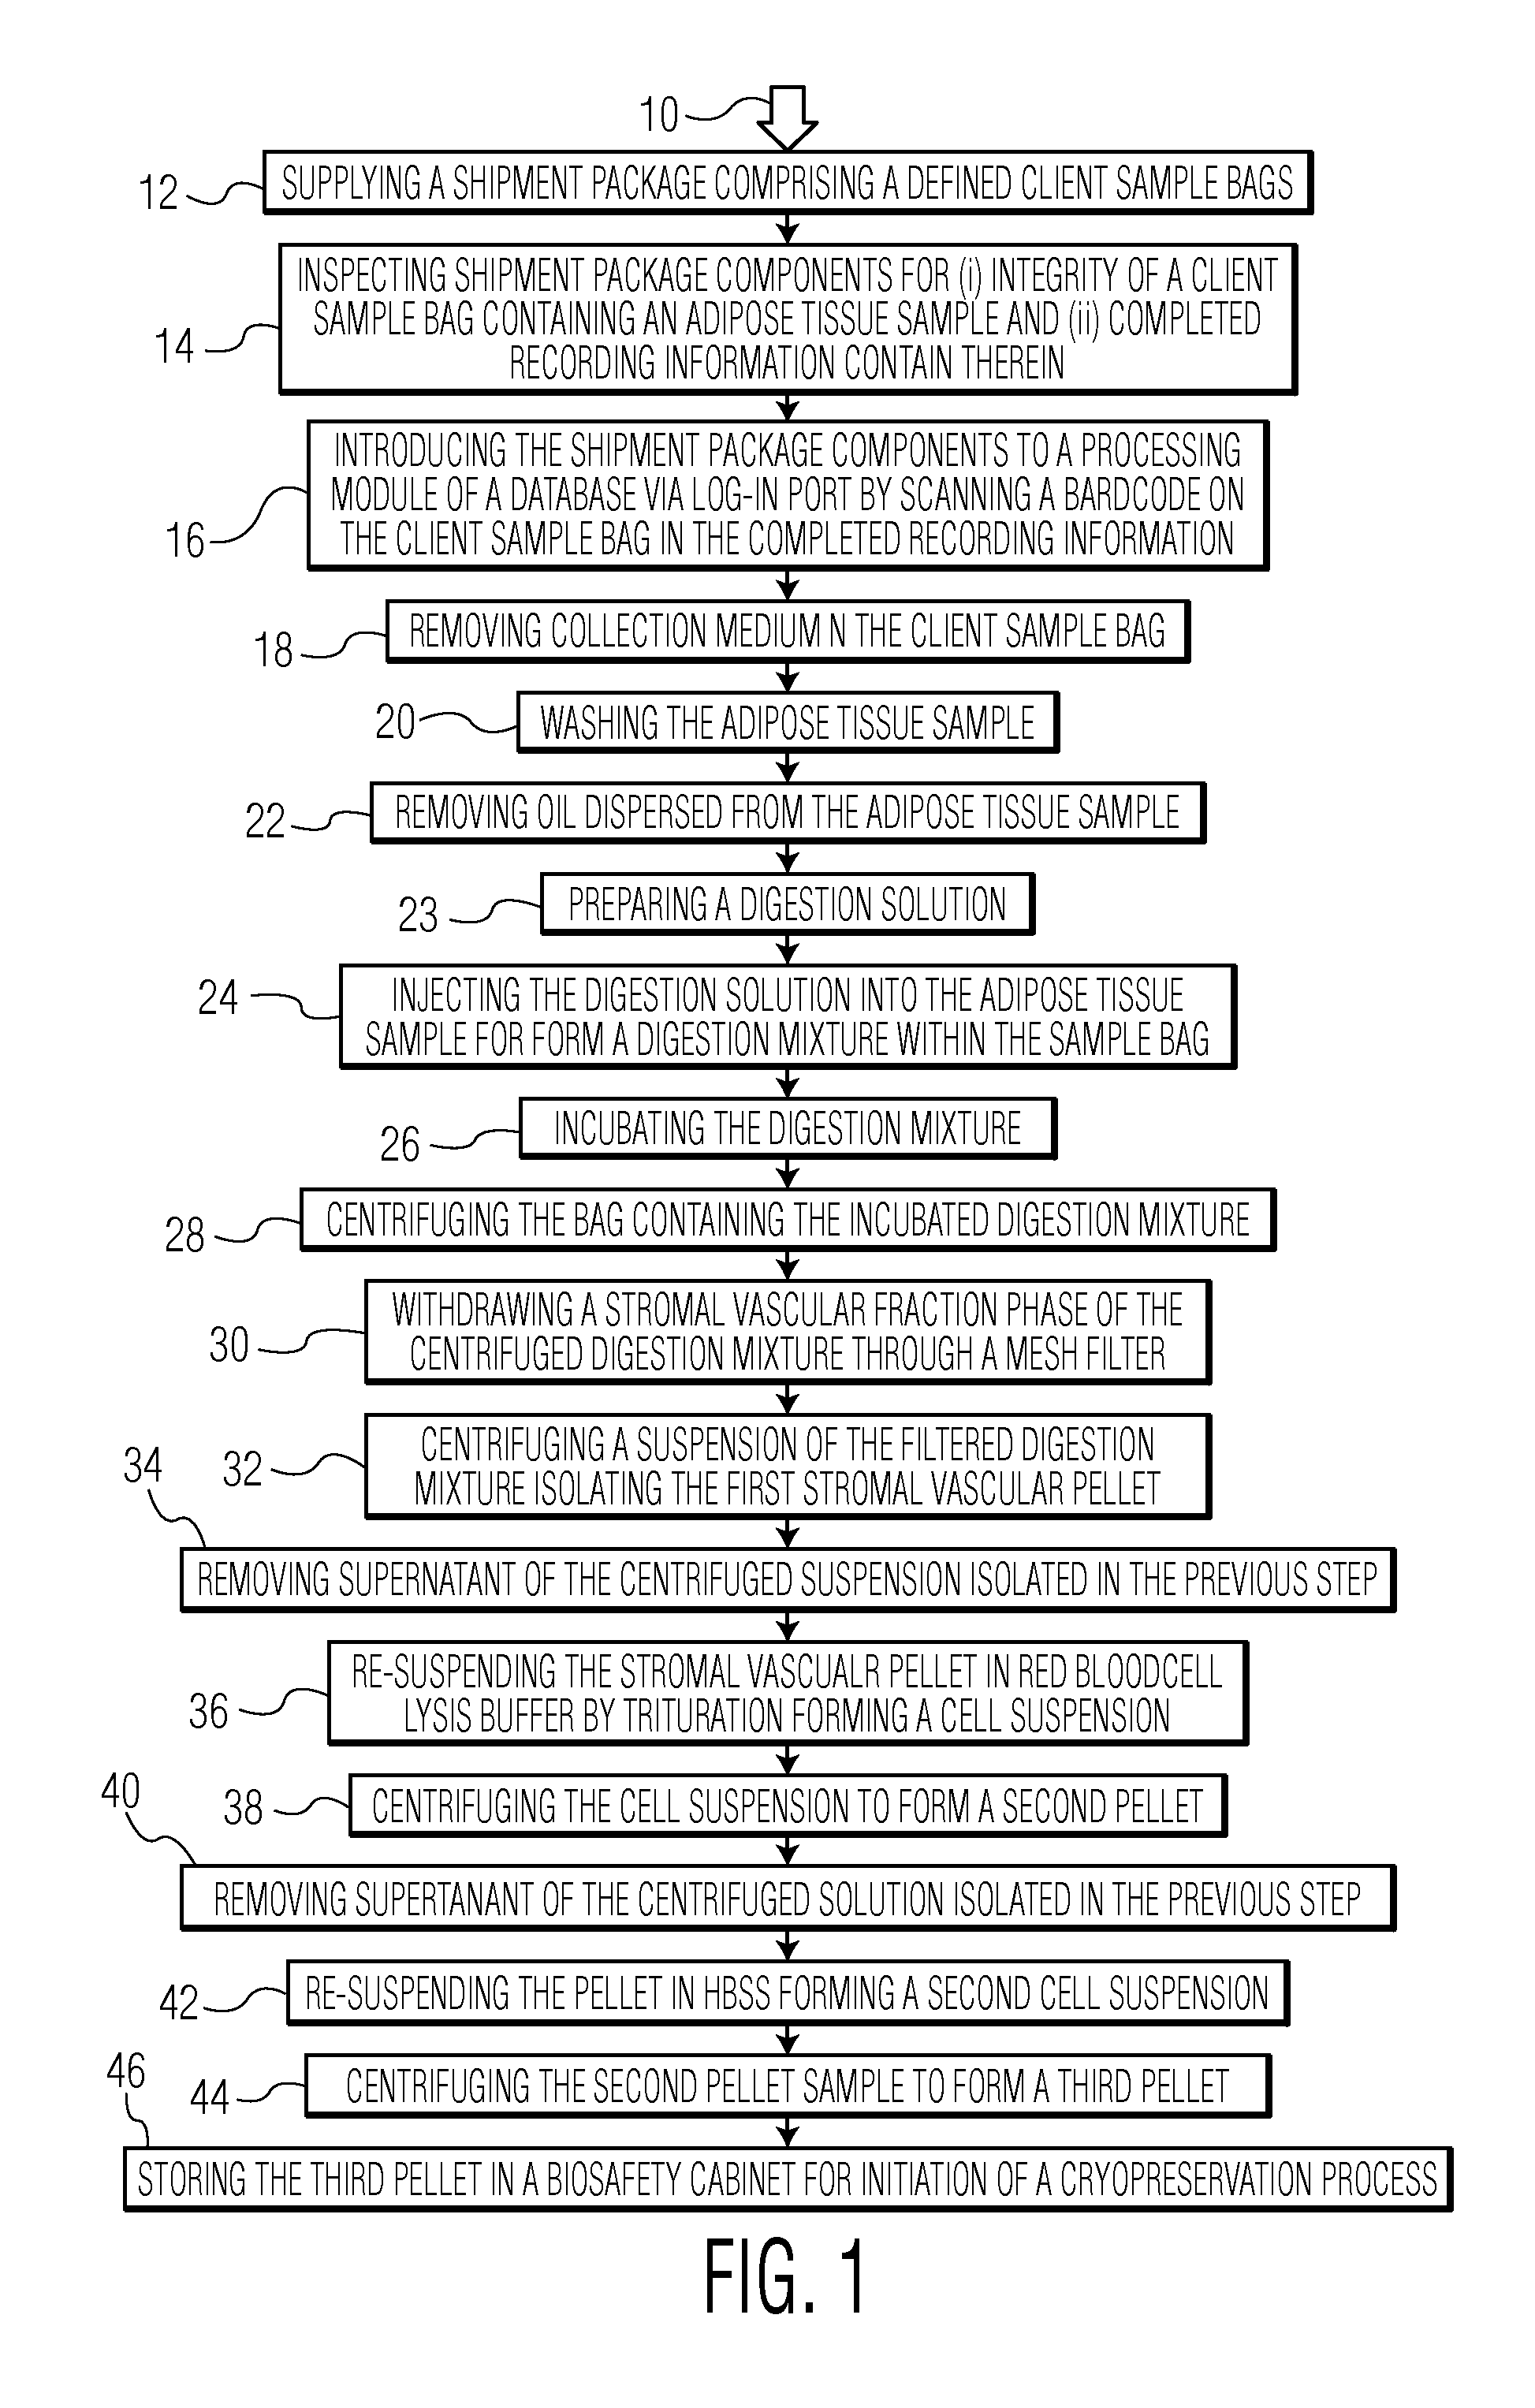 Systems and methods for the digestion of adipose tissue samples obtained from a client for cryopreservation